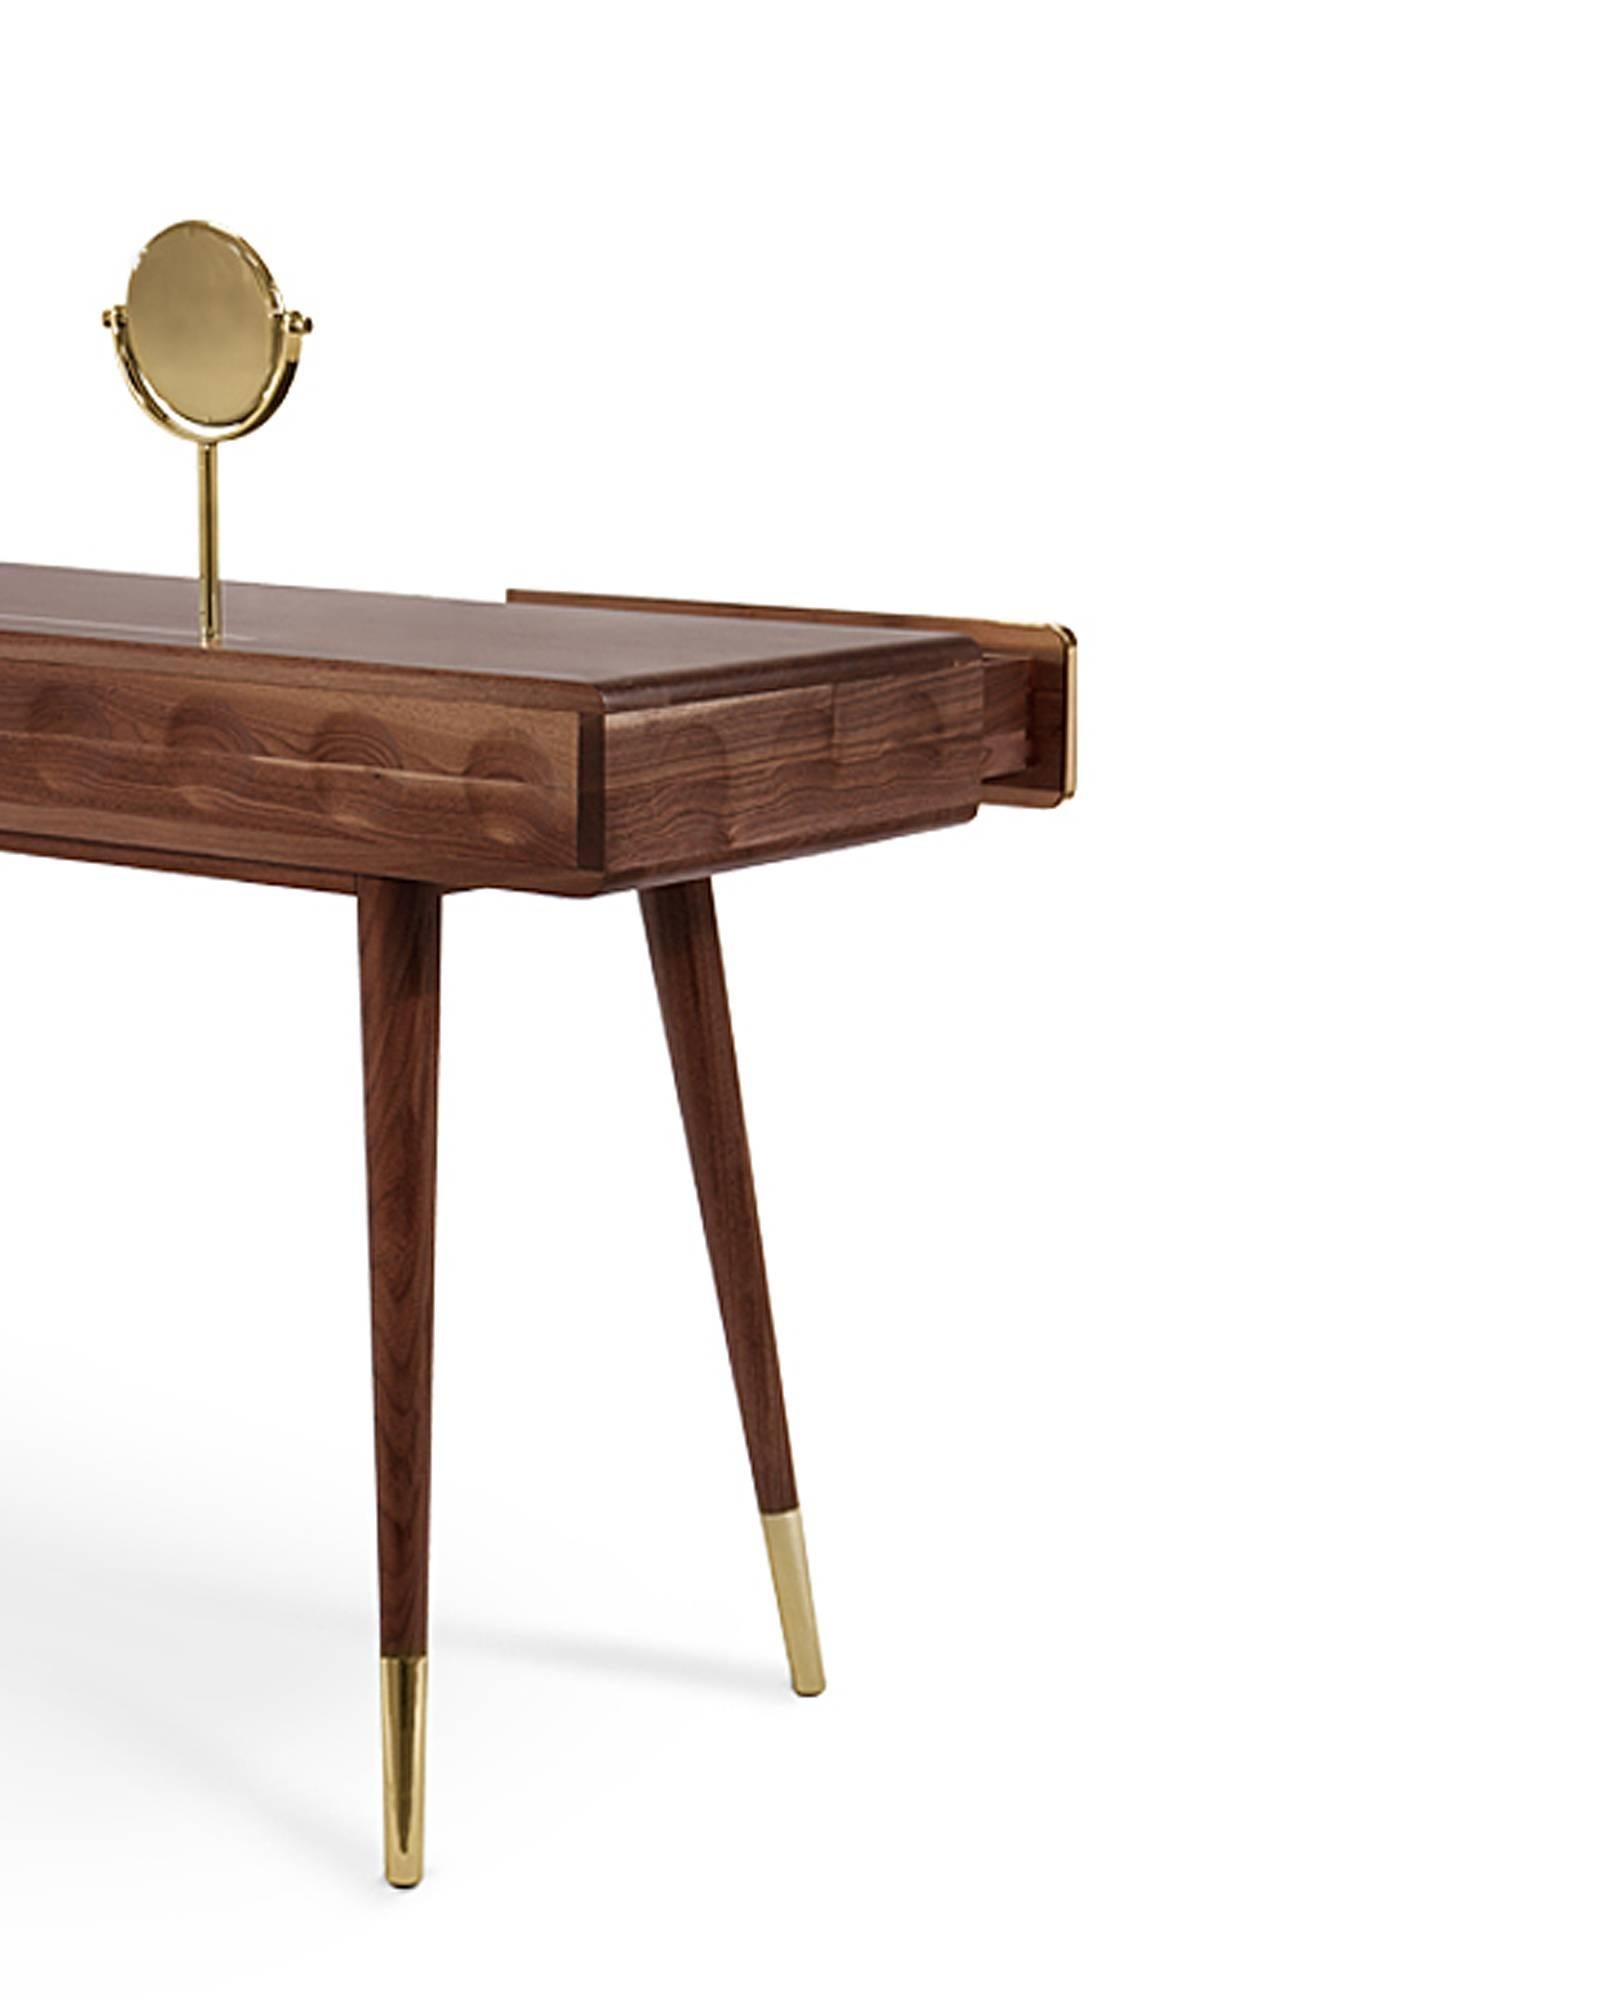 Contemporary Golden Drawers Desk Walnut Wood For Sale